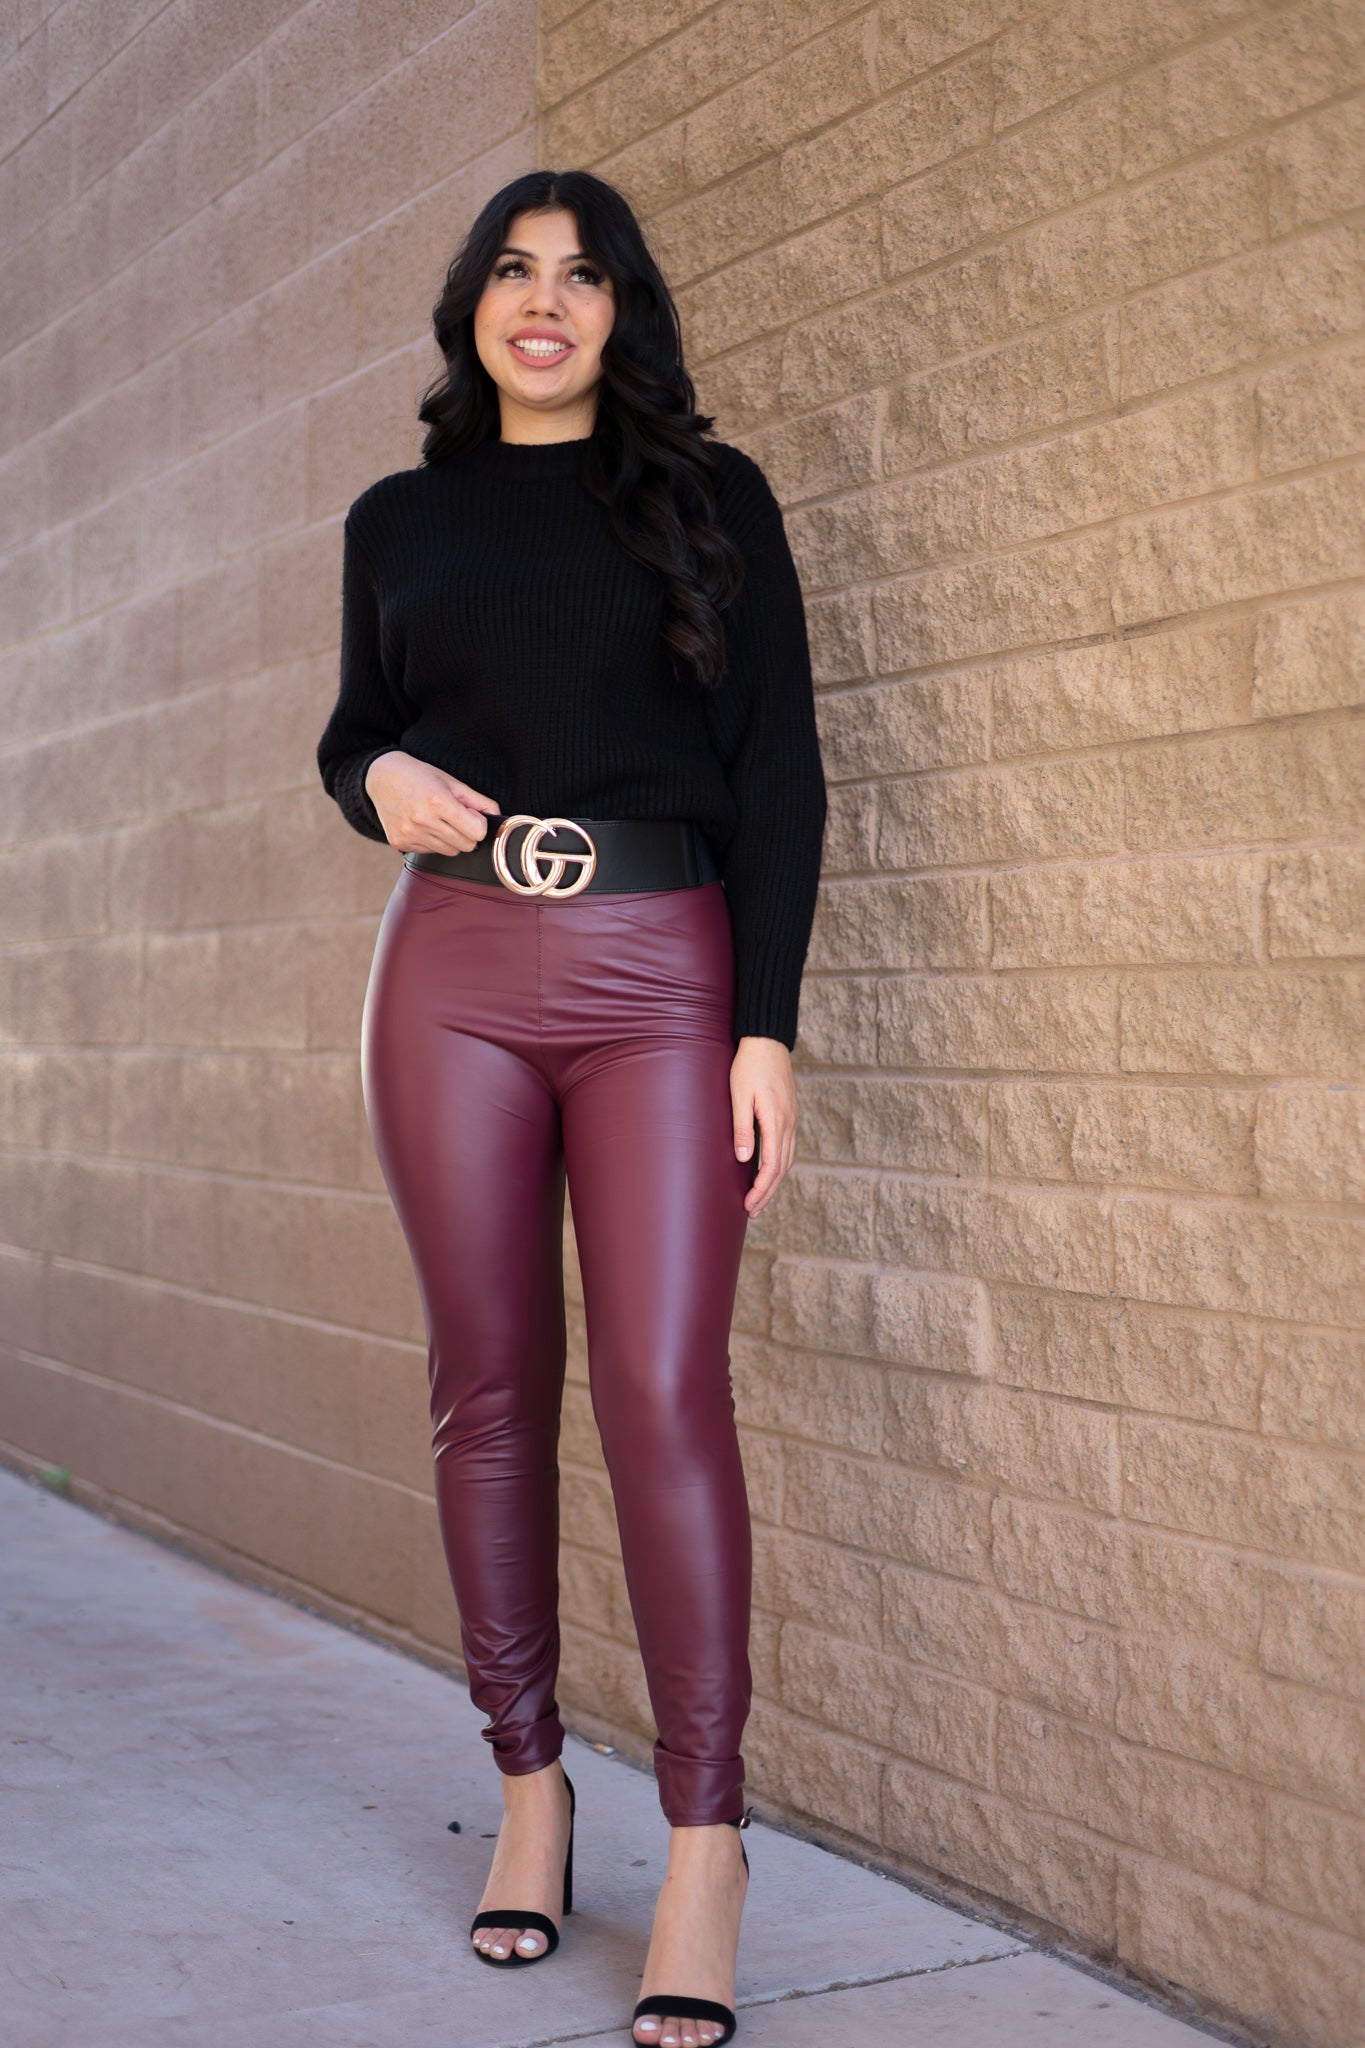 XBurgundy - Don't Quit Pleather Faux Leather Leggings